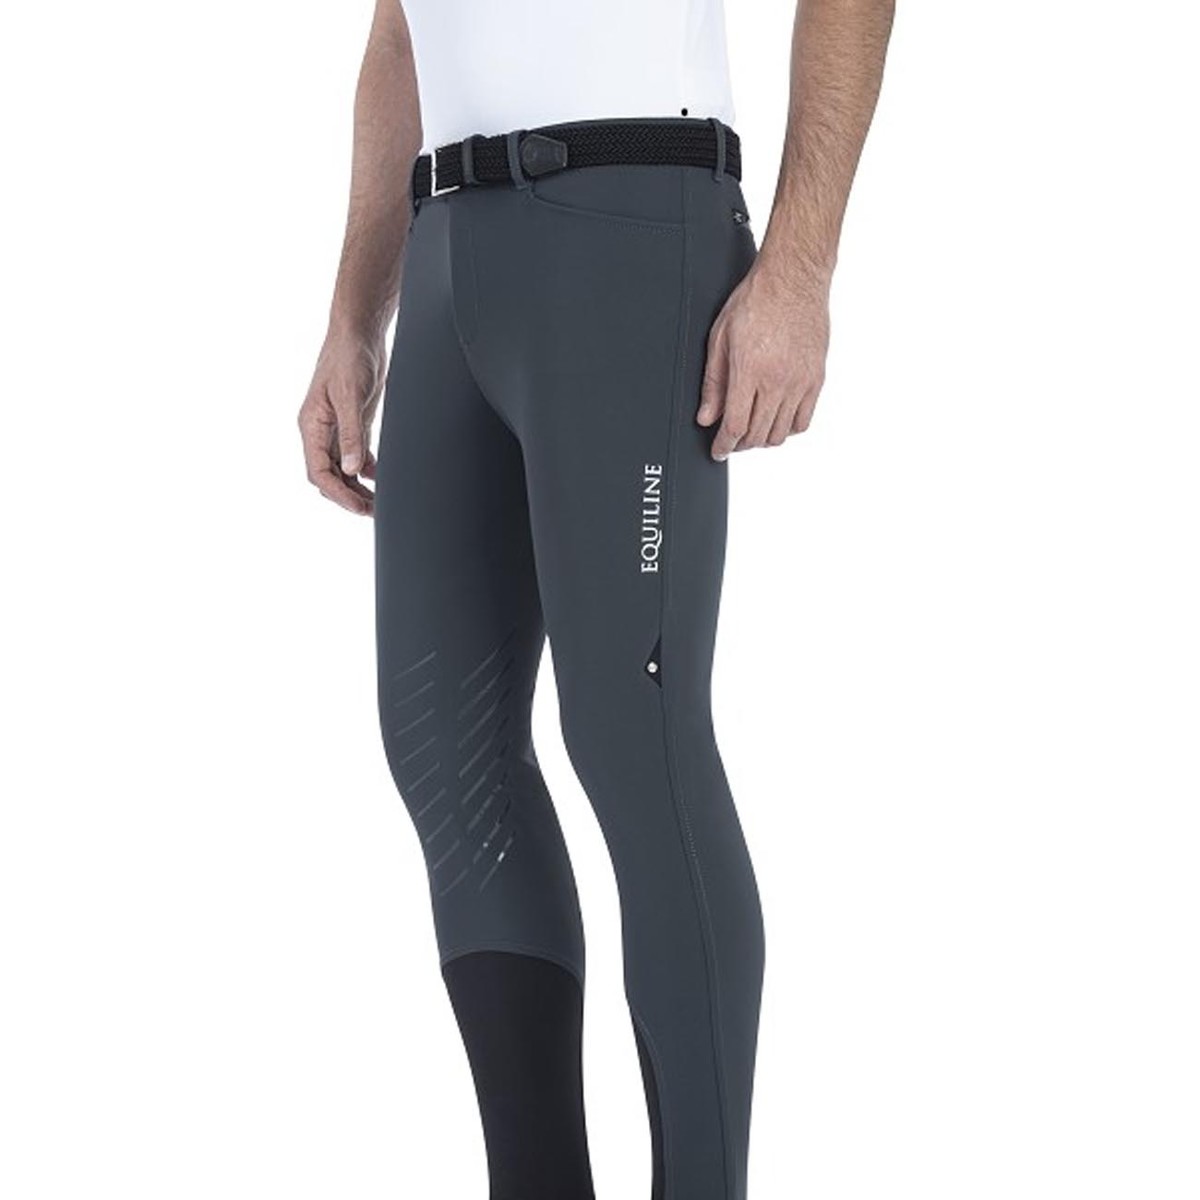 Breeches | Horse riding trousers mens | Horse riding pants | Riding breeches  - YouTube